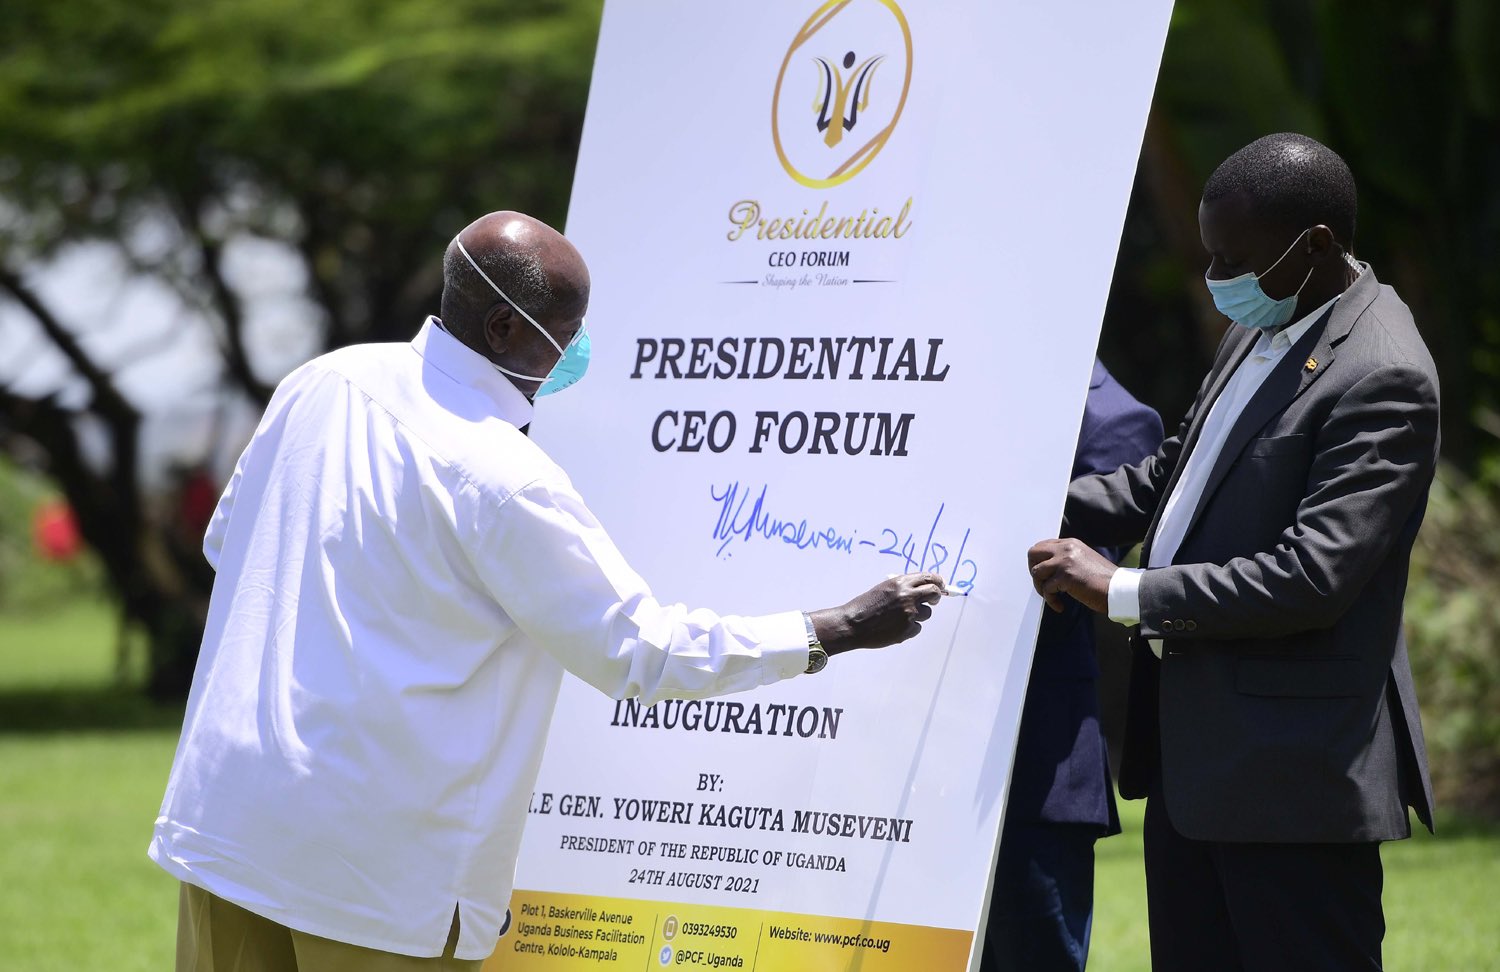 H.E President Yoweri Museveni inaugurating the Presidential CEO Forum (PCF) on 24th August 2021